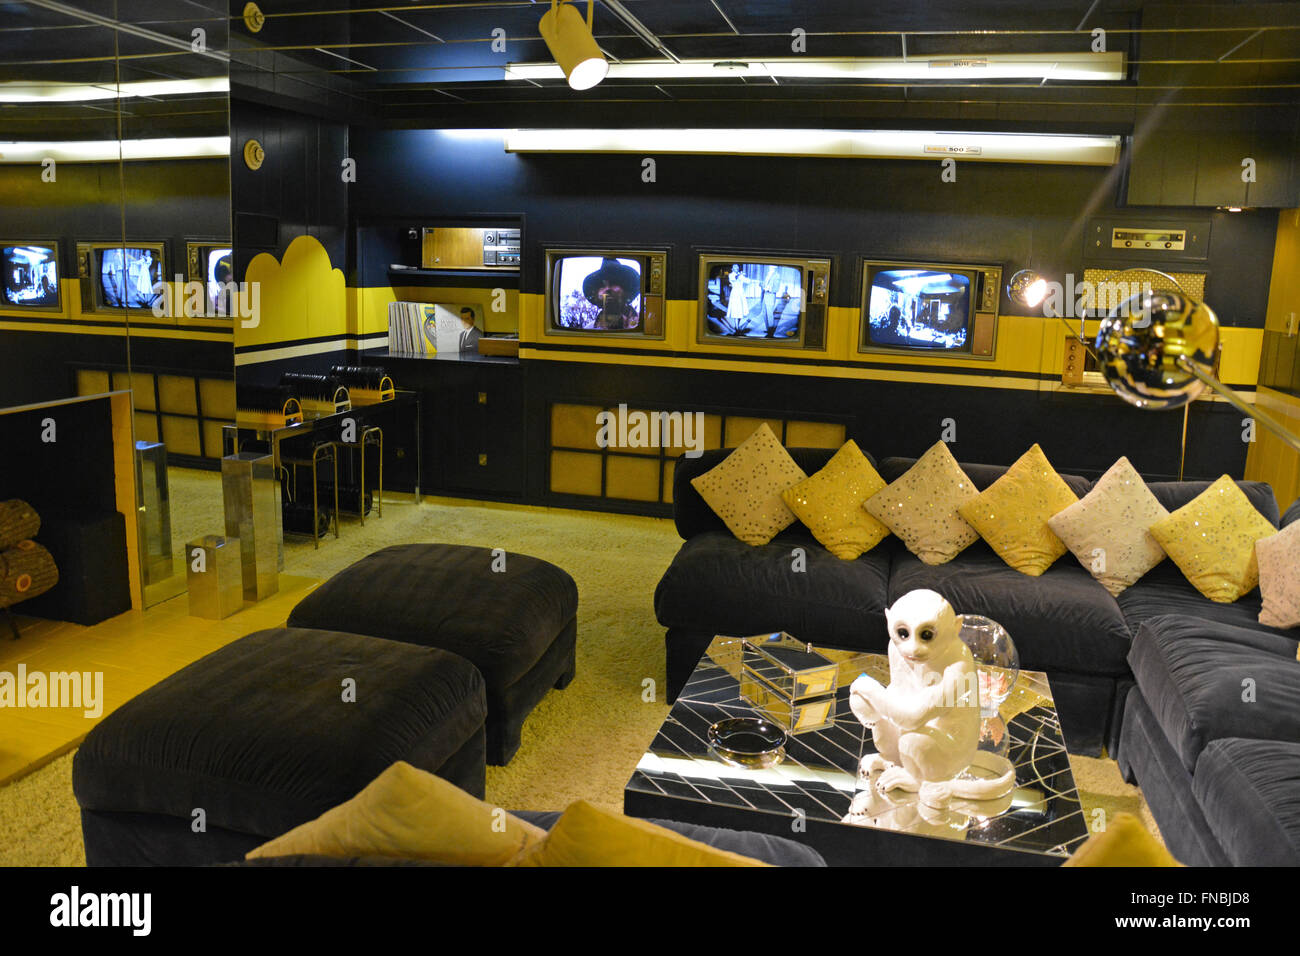 The media room at Graceland, Elvis Presley's home and now a museum in Memphis Tennessee. Stock Photo